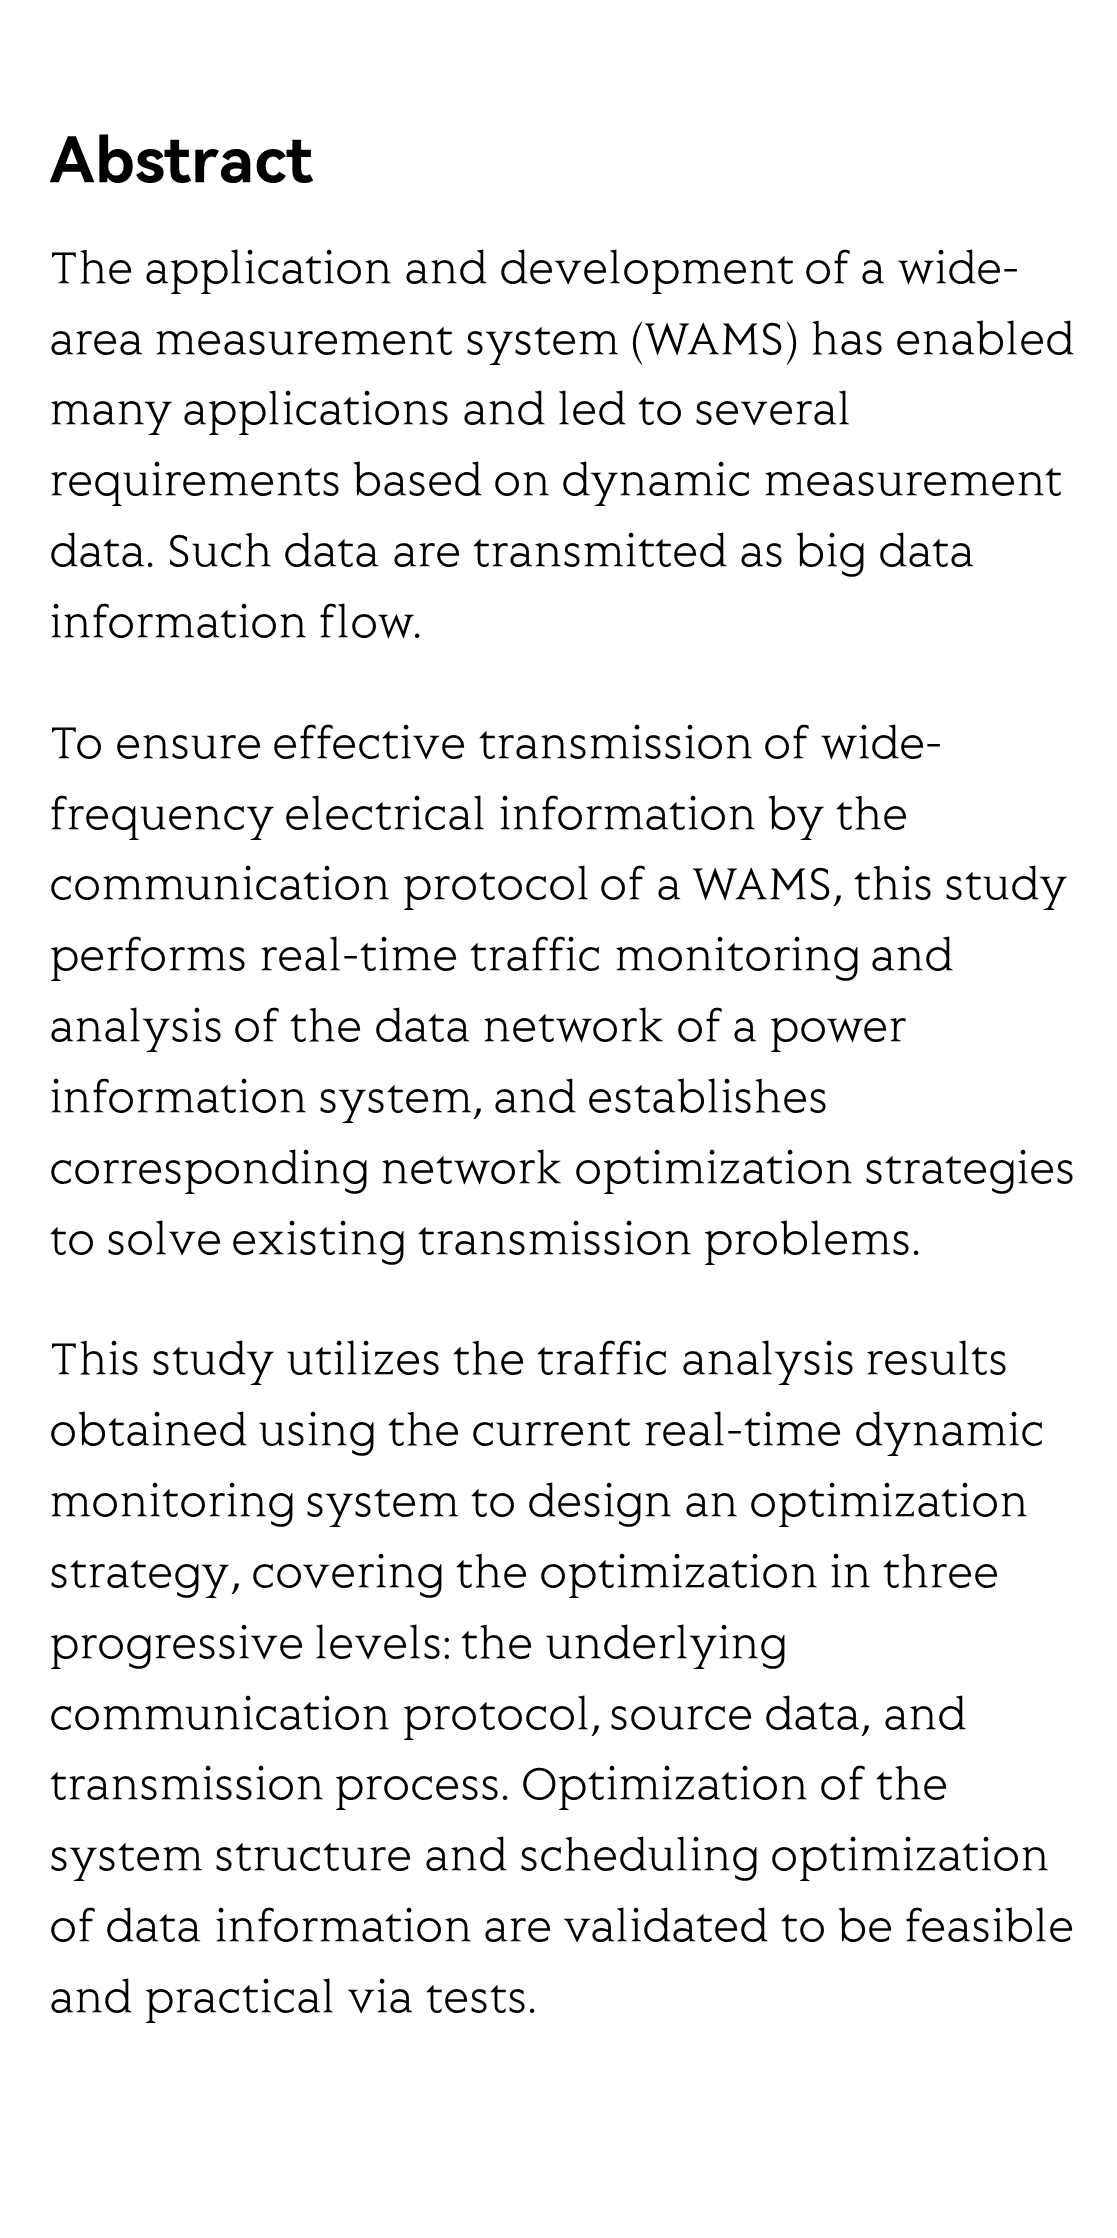 Data network traffic analysis and optimization strategy of real-time power grid dynamic monitoring system for wide-frequency measurements_2